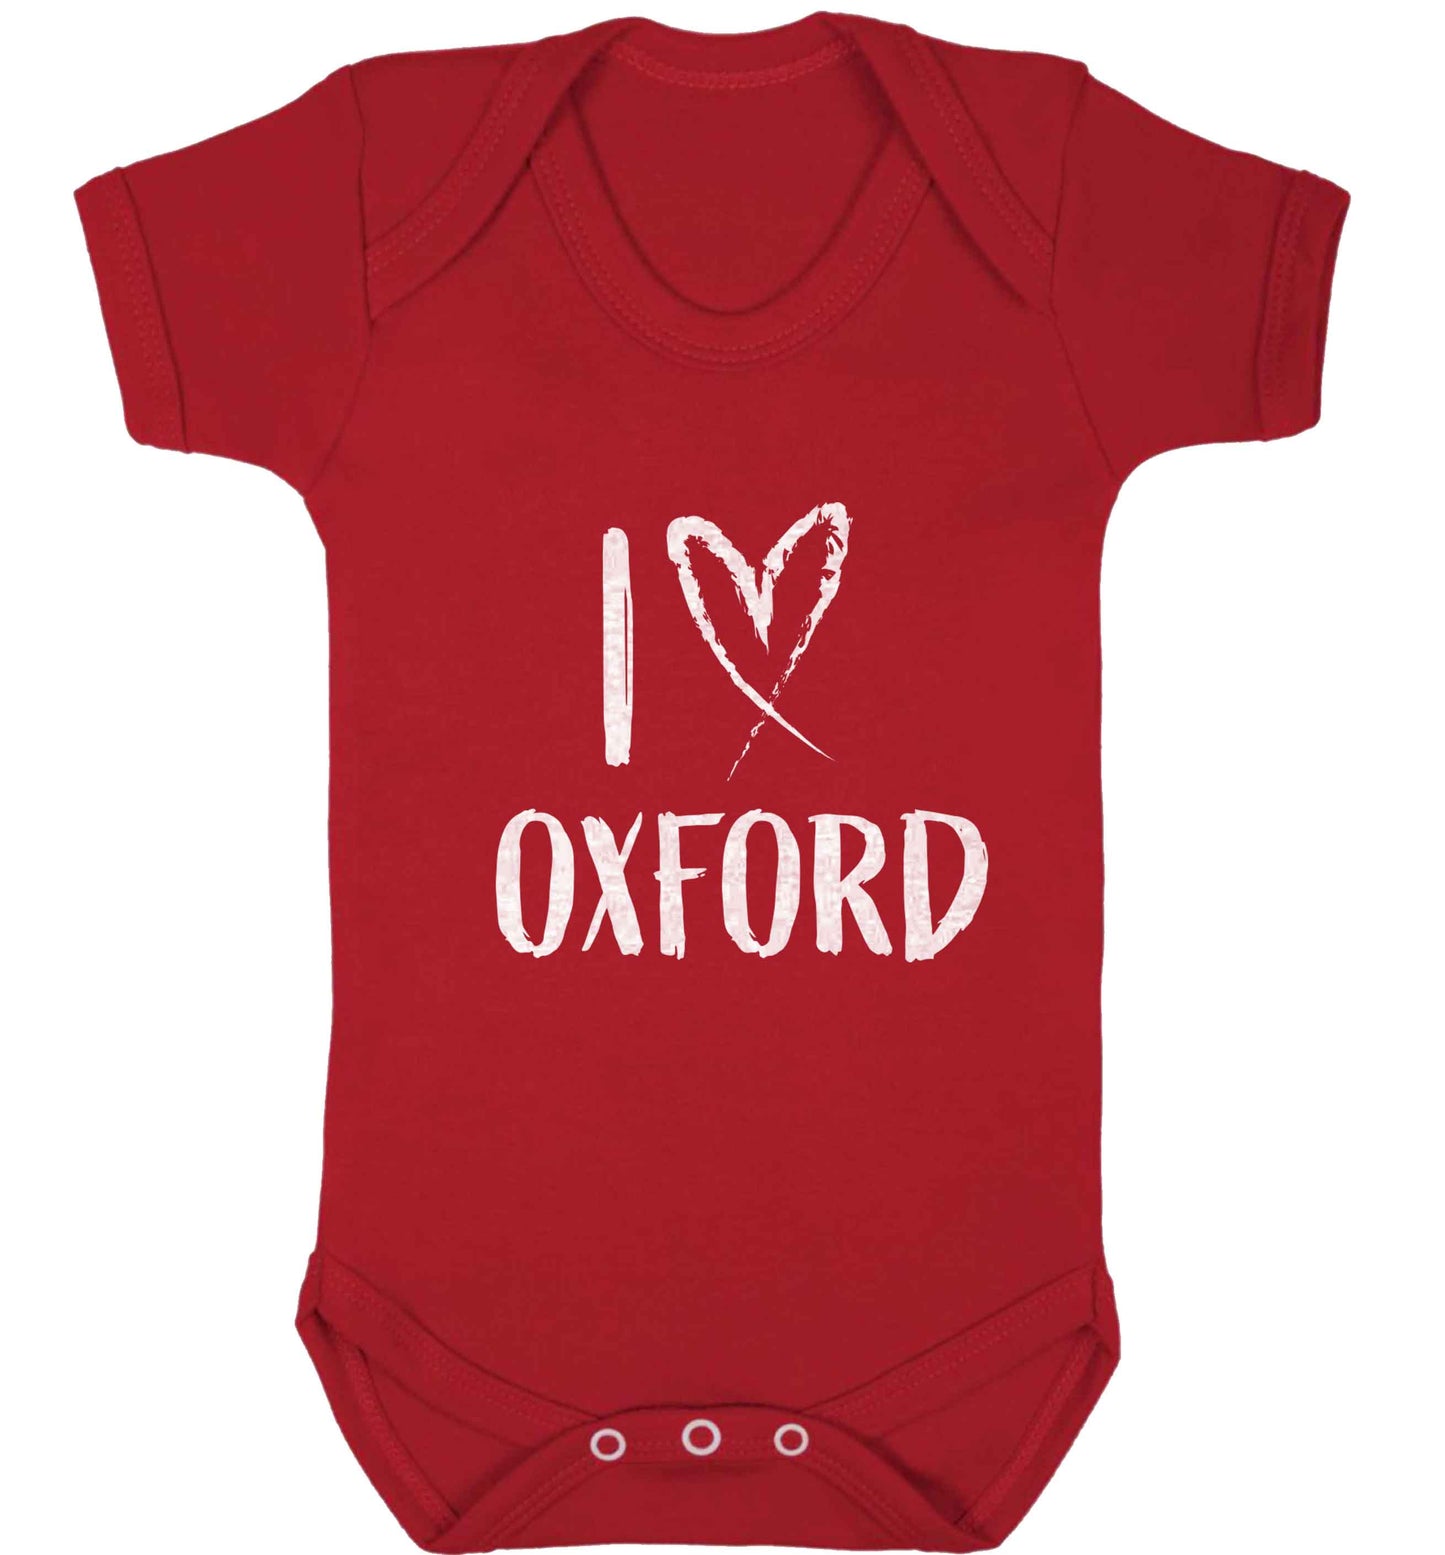 I love Oxford baby vest red 18-24 months